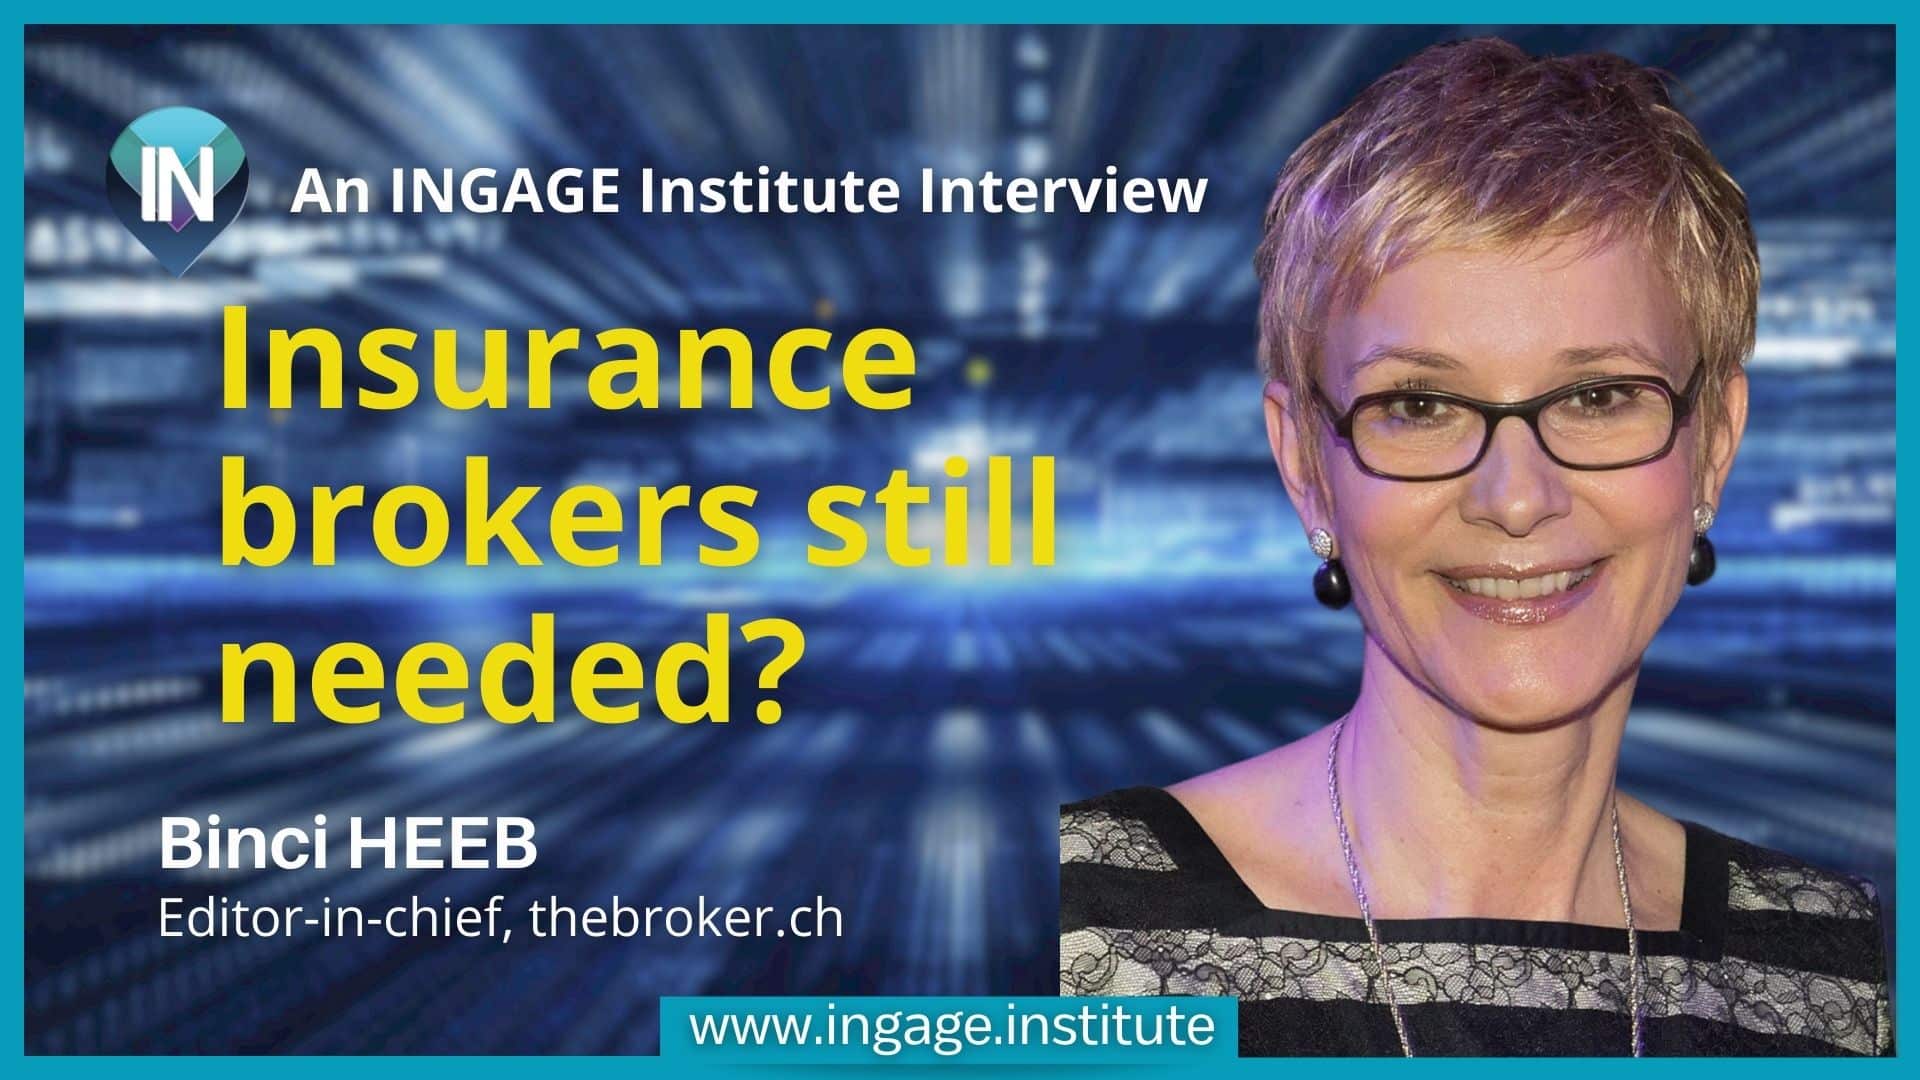 Insurance brokers still needed? Binci Heeb answers to this an many more questions.